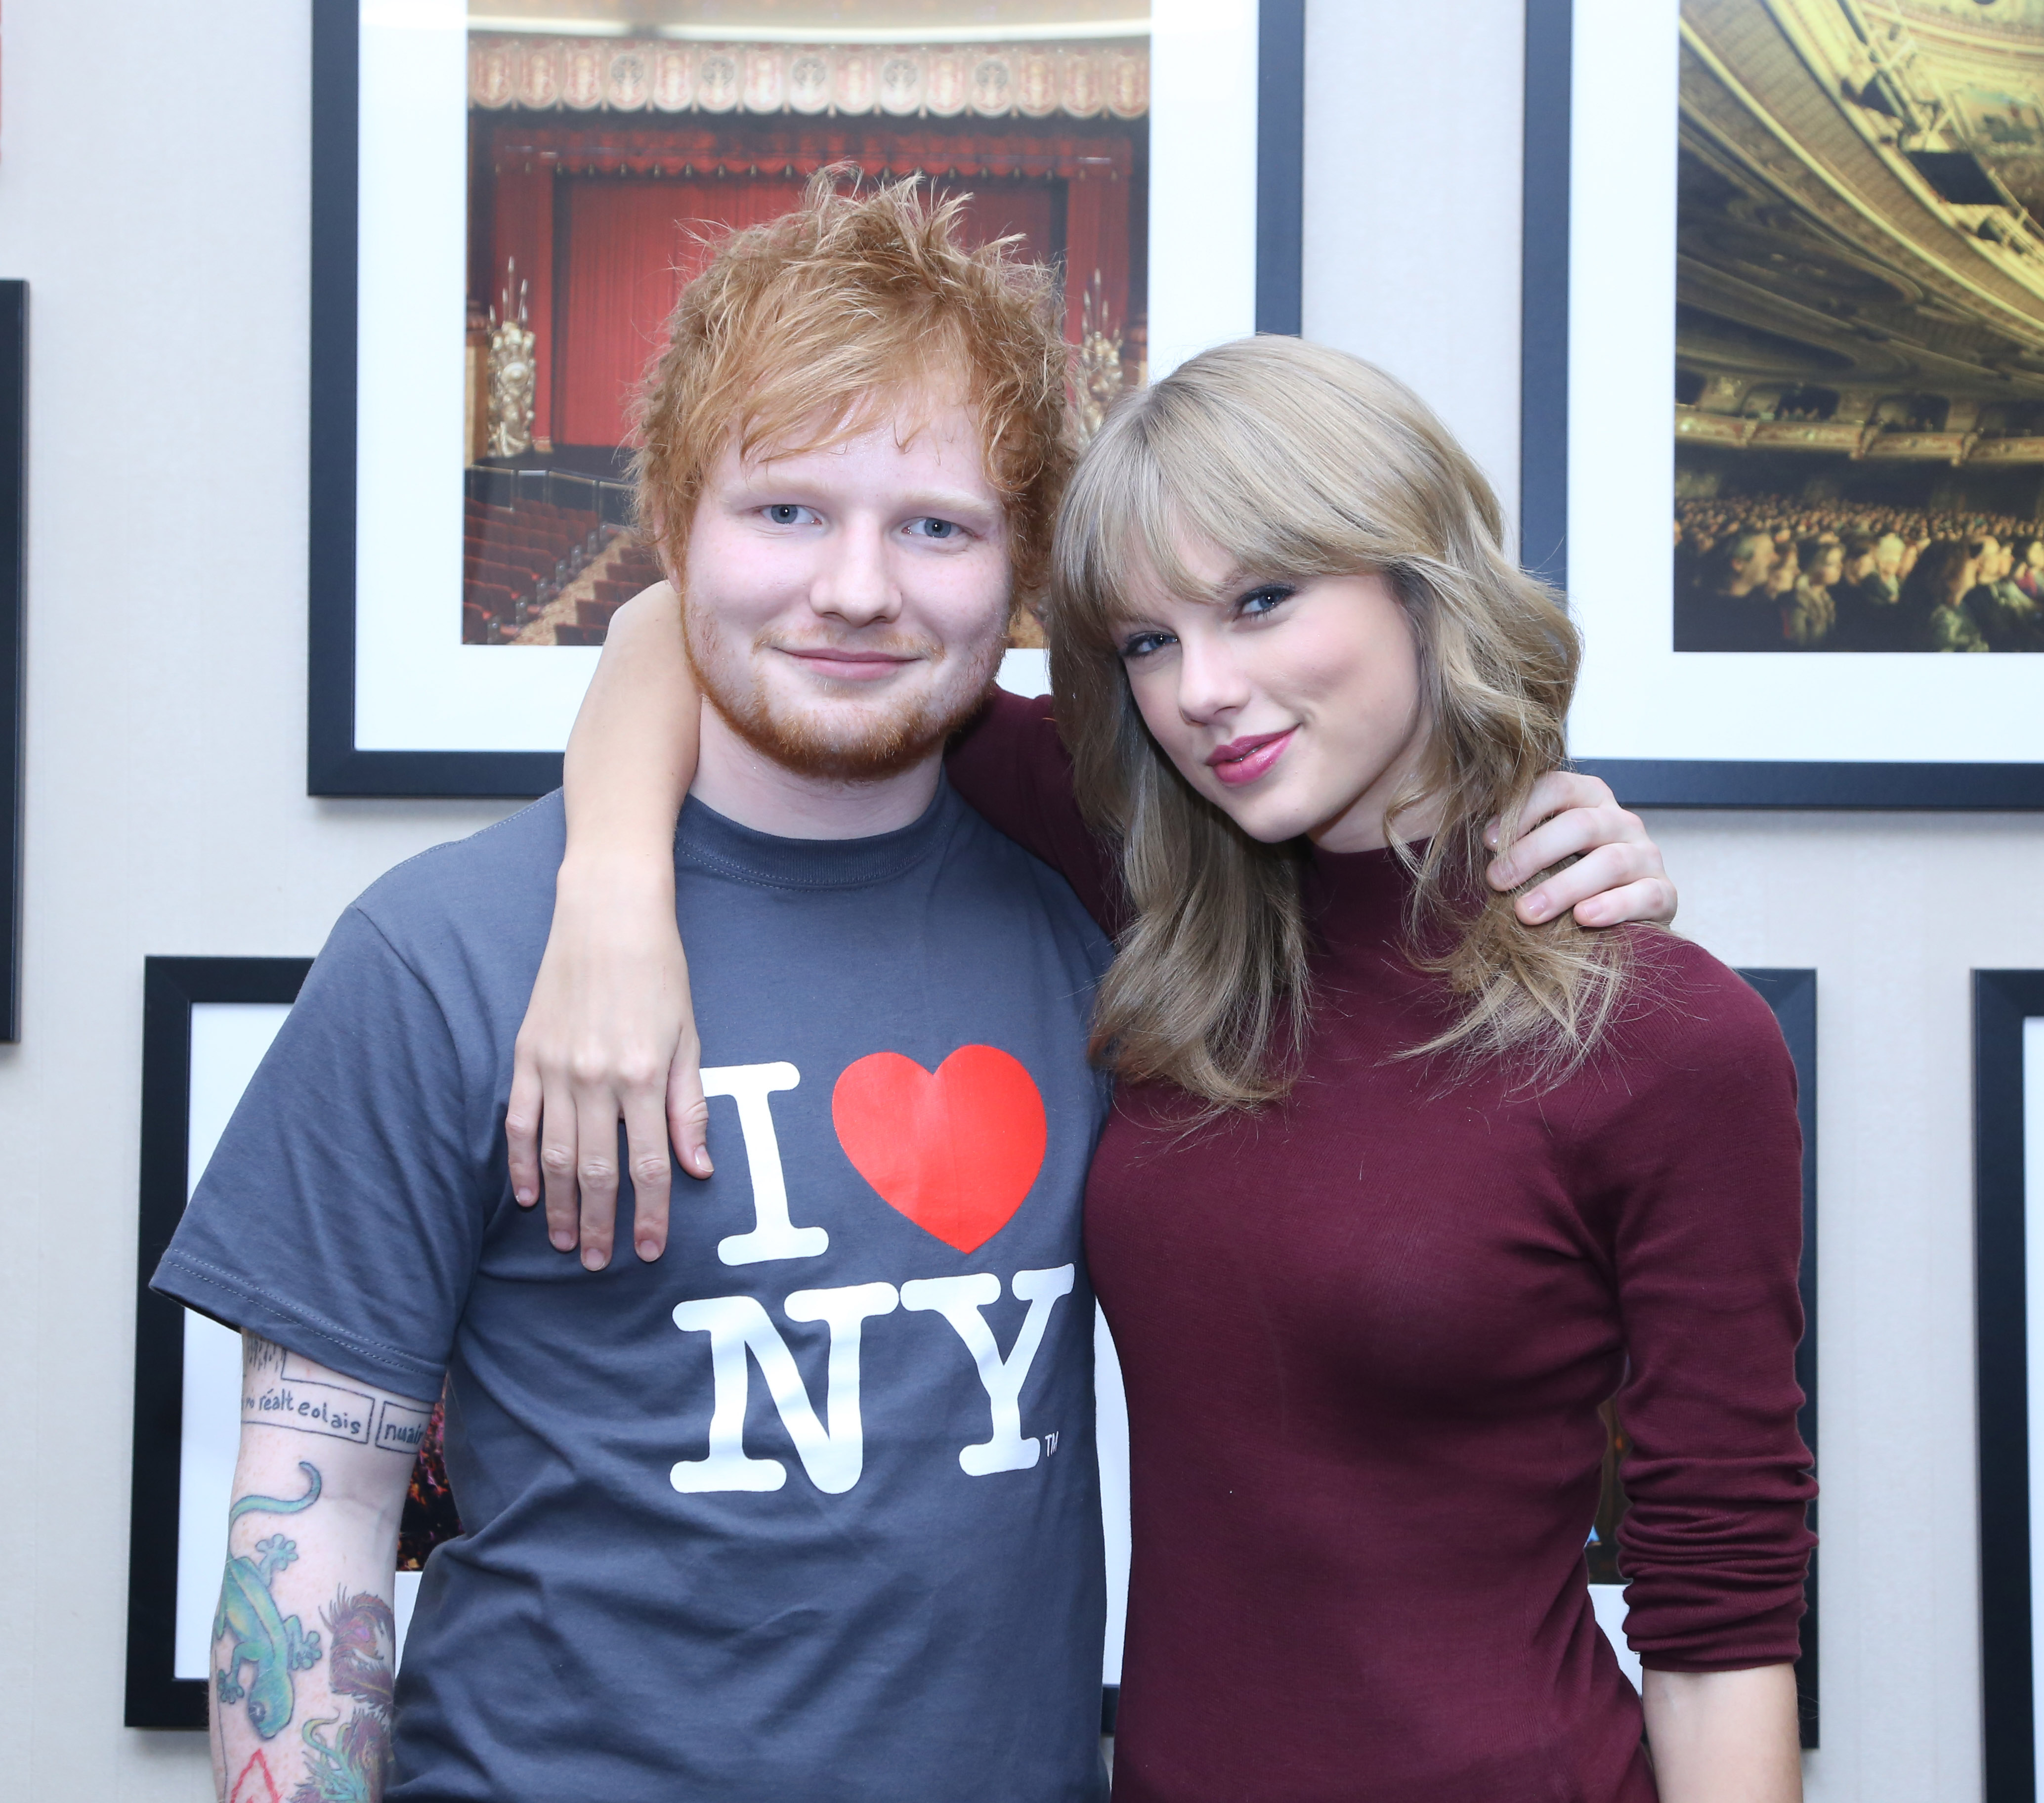 Ed Sheeran poses with Taylor Swift backstage before his sold-out show at Madison Square Garden Arena on November 1, 2013 in New York City. (Anna Webber&mdash;Getty Images)